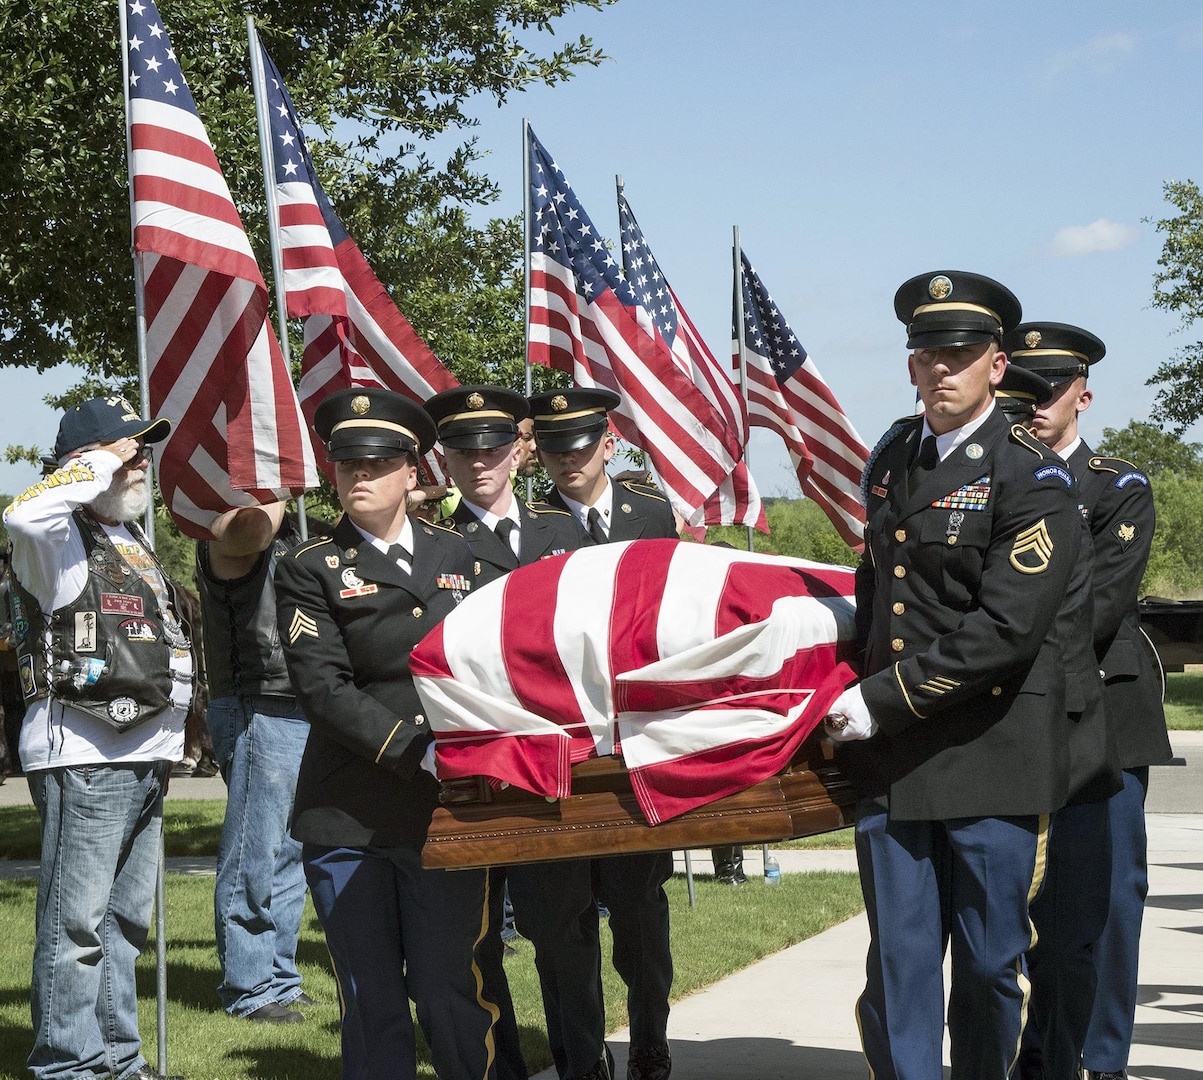 Members of the Joint Base San Antonio-Fort Sam Houston Honor Guard carry the coffin with the remains of Army Cpl. Frank Sandoval past members of the Patriot Guard Riders on the way to the assembly area at the Fort Sam Houston National Cemetery July 11.